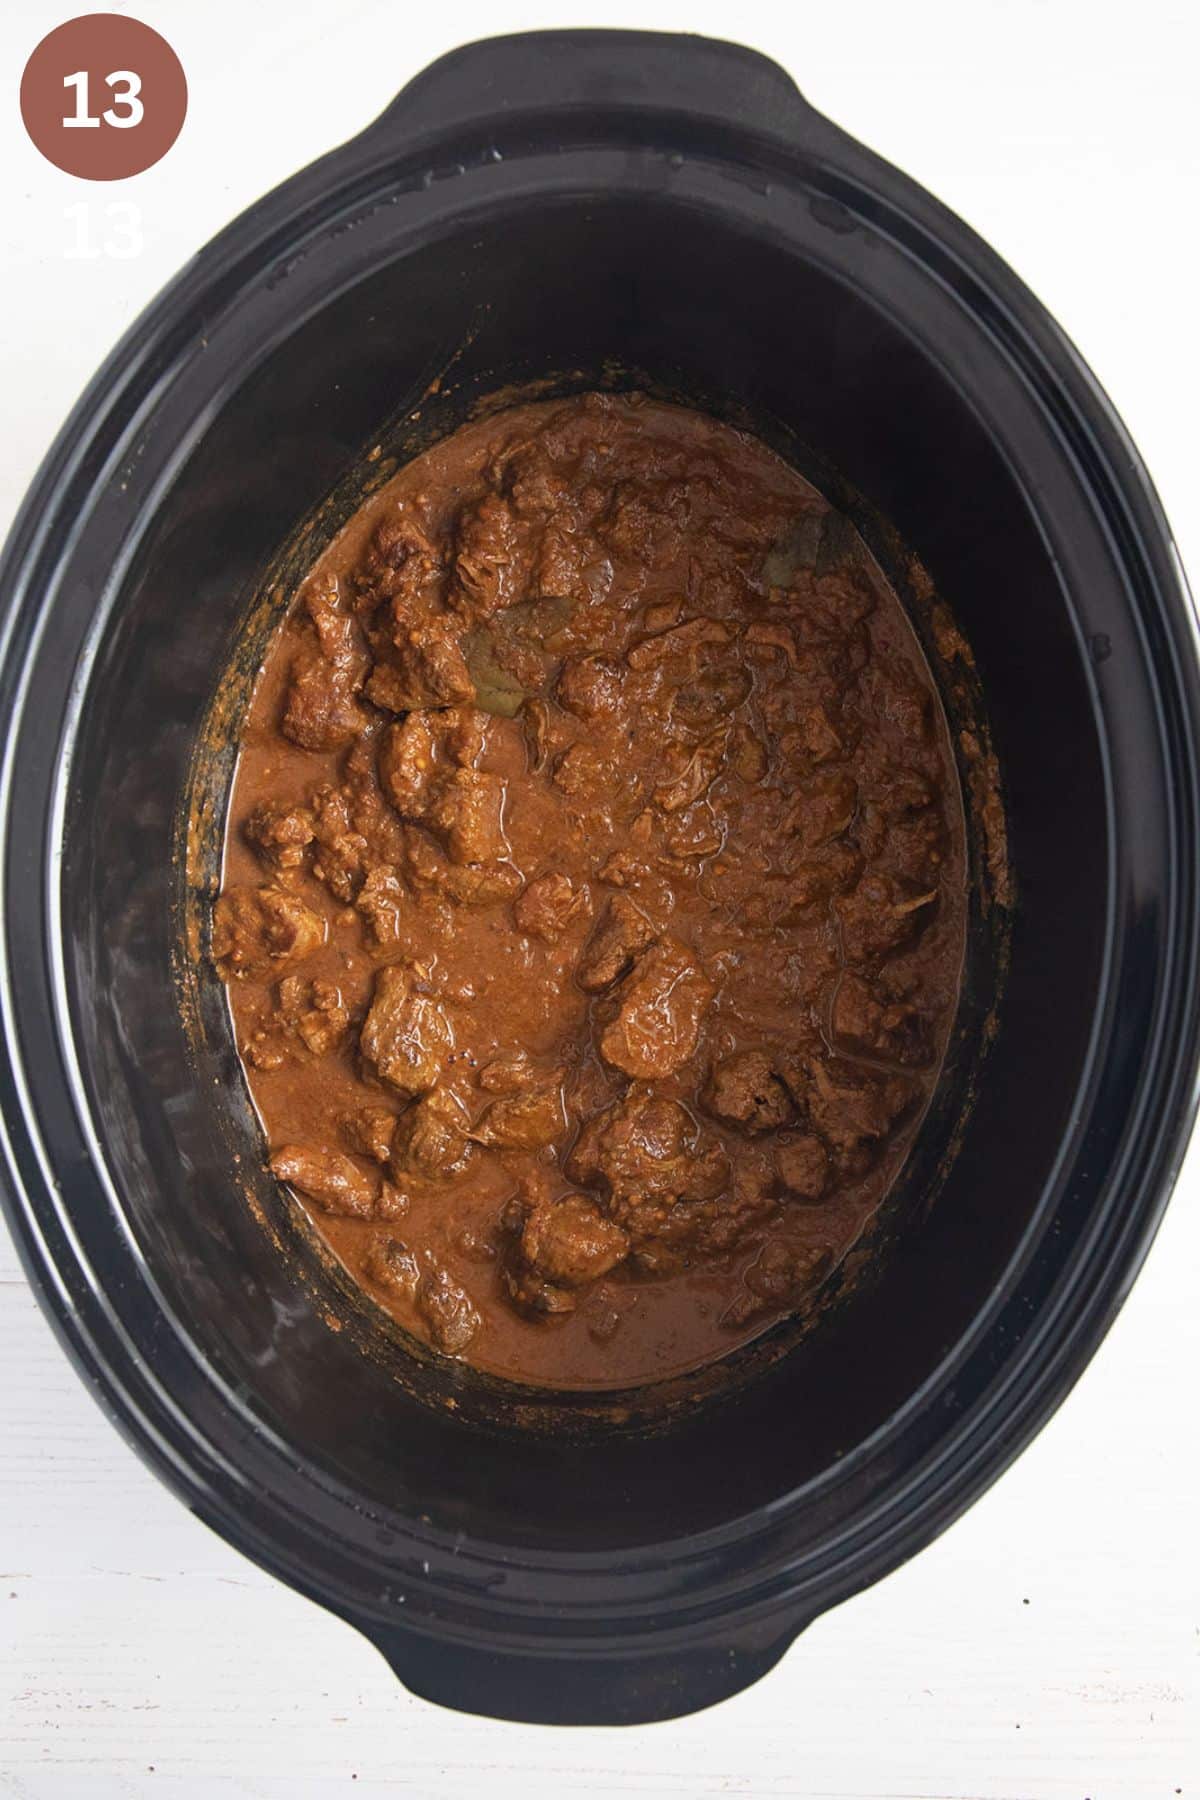 lamb curry in the pot of the slow cooker.